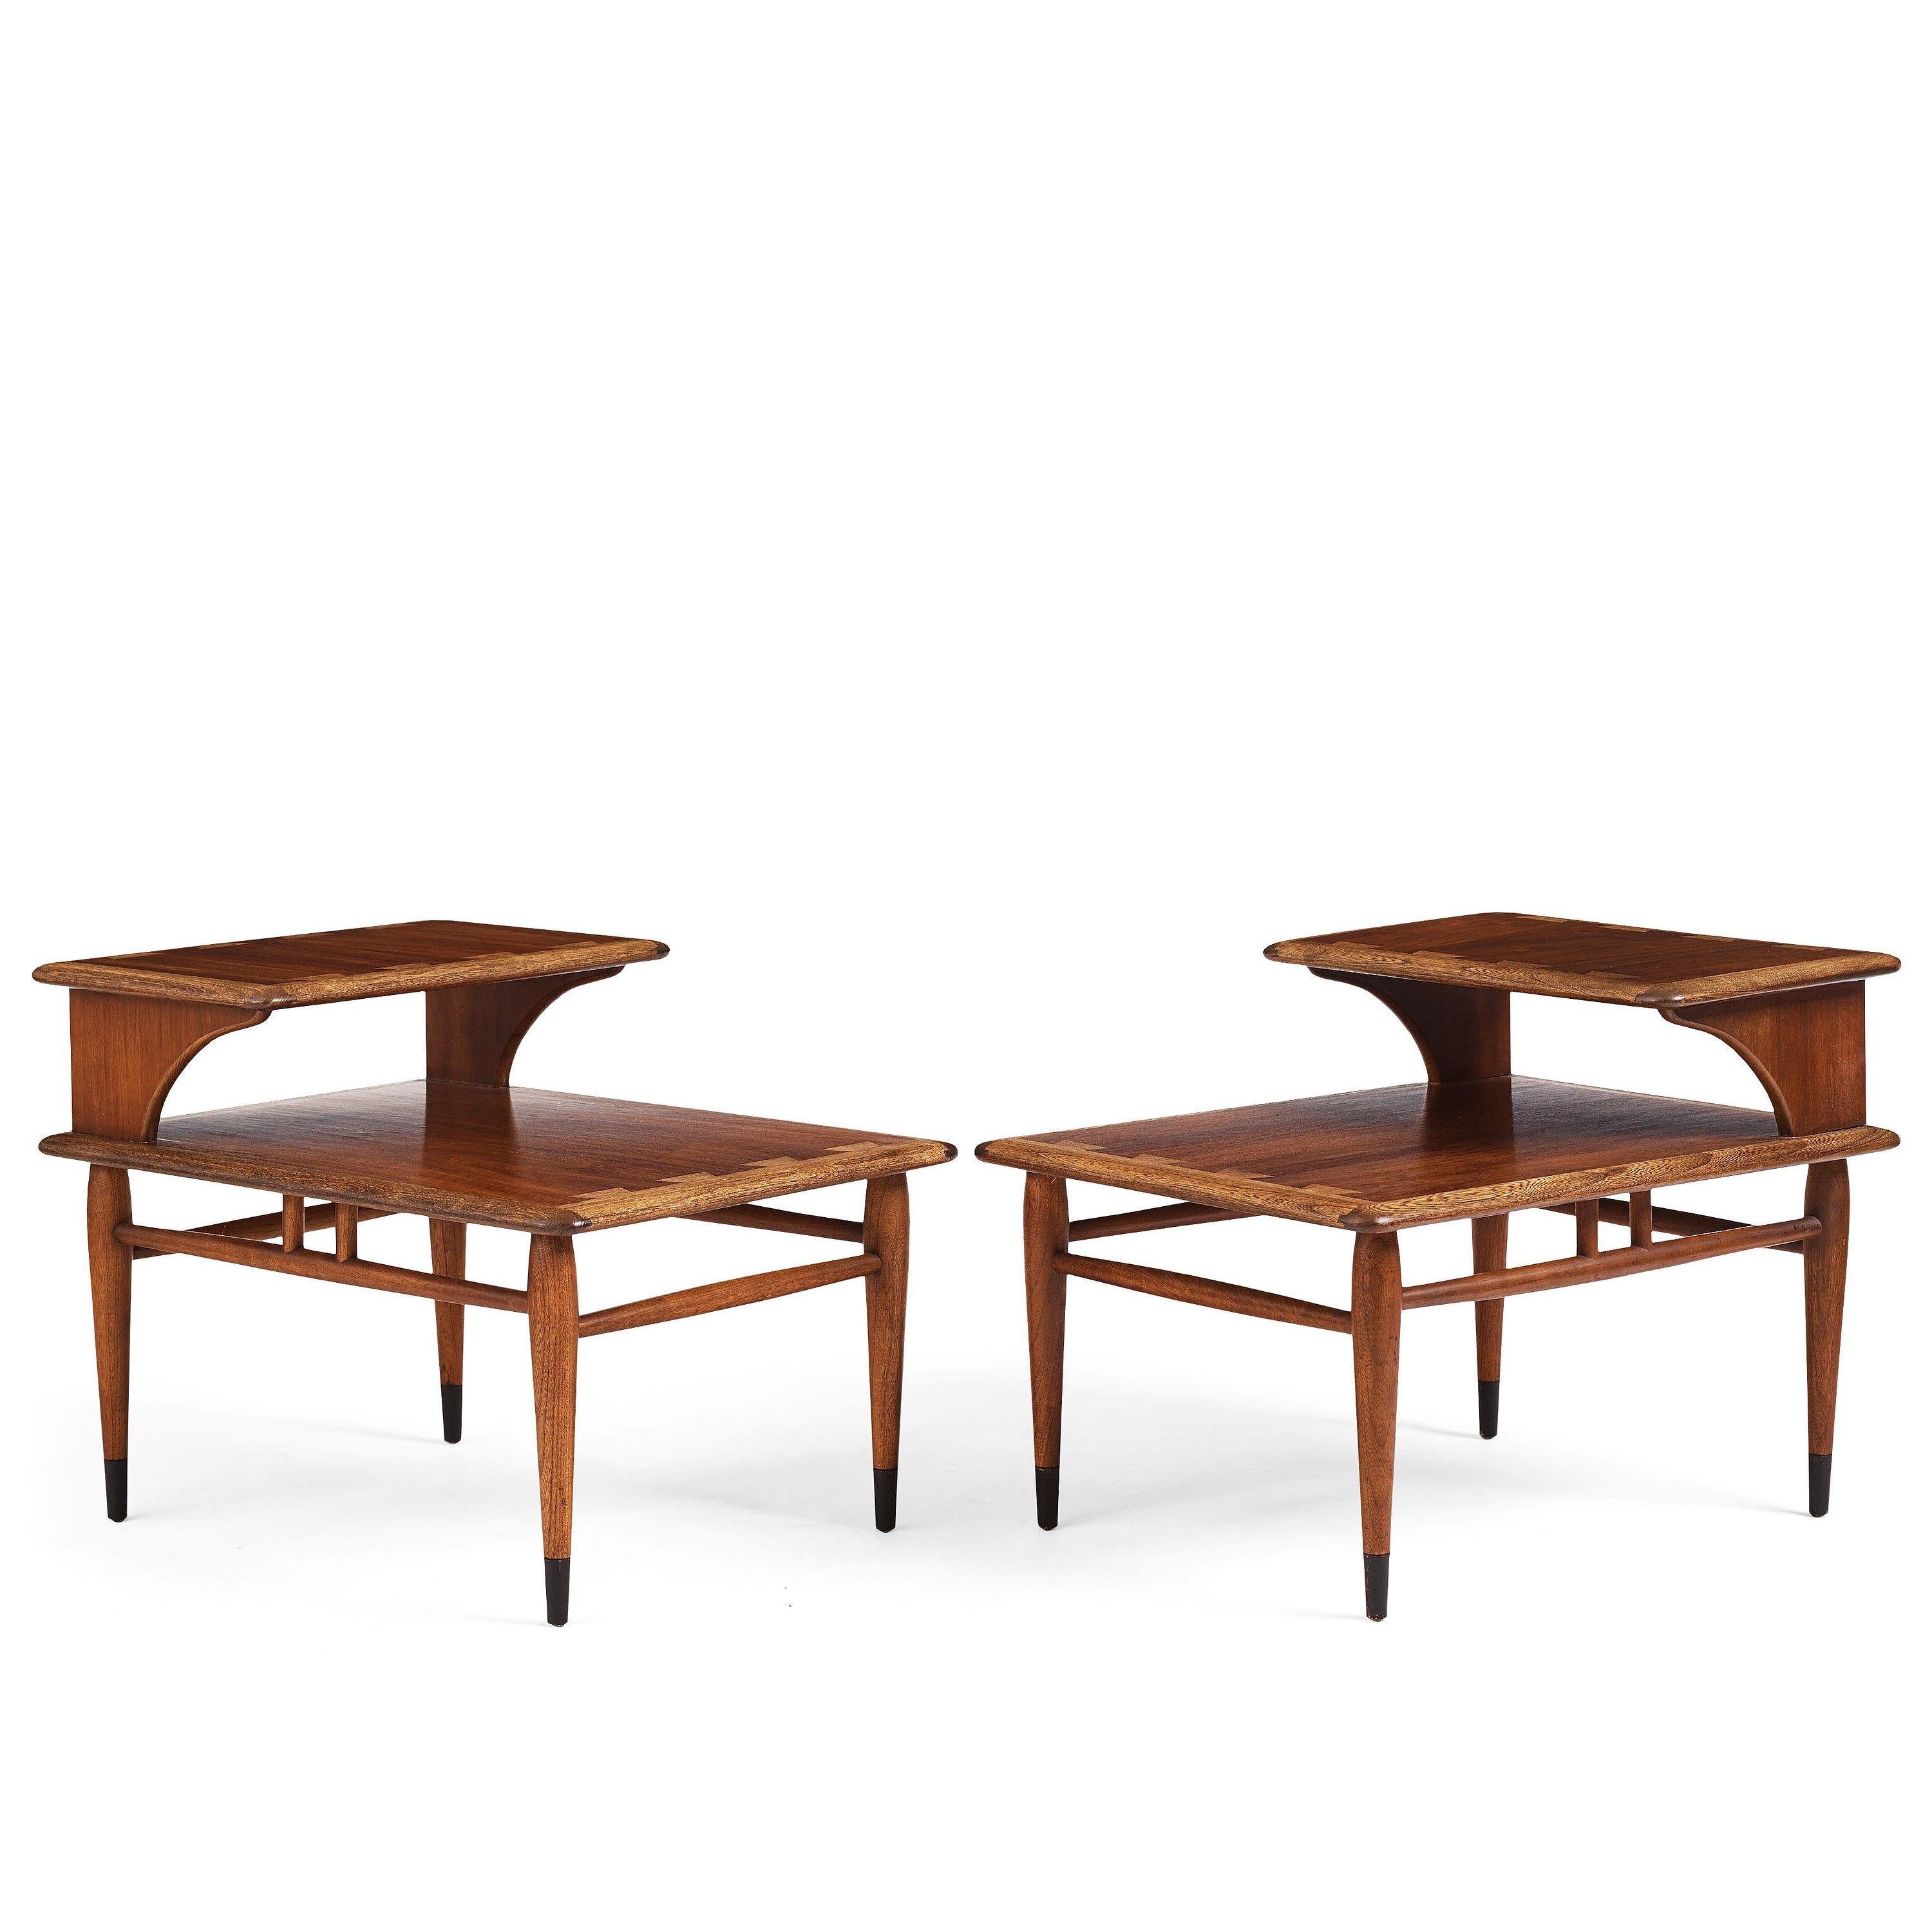 Andre Bus a Pair of 'Acclaim' Walnut Side Tables Forlane USA 1960 Signed For Sale 1